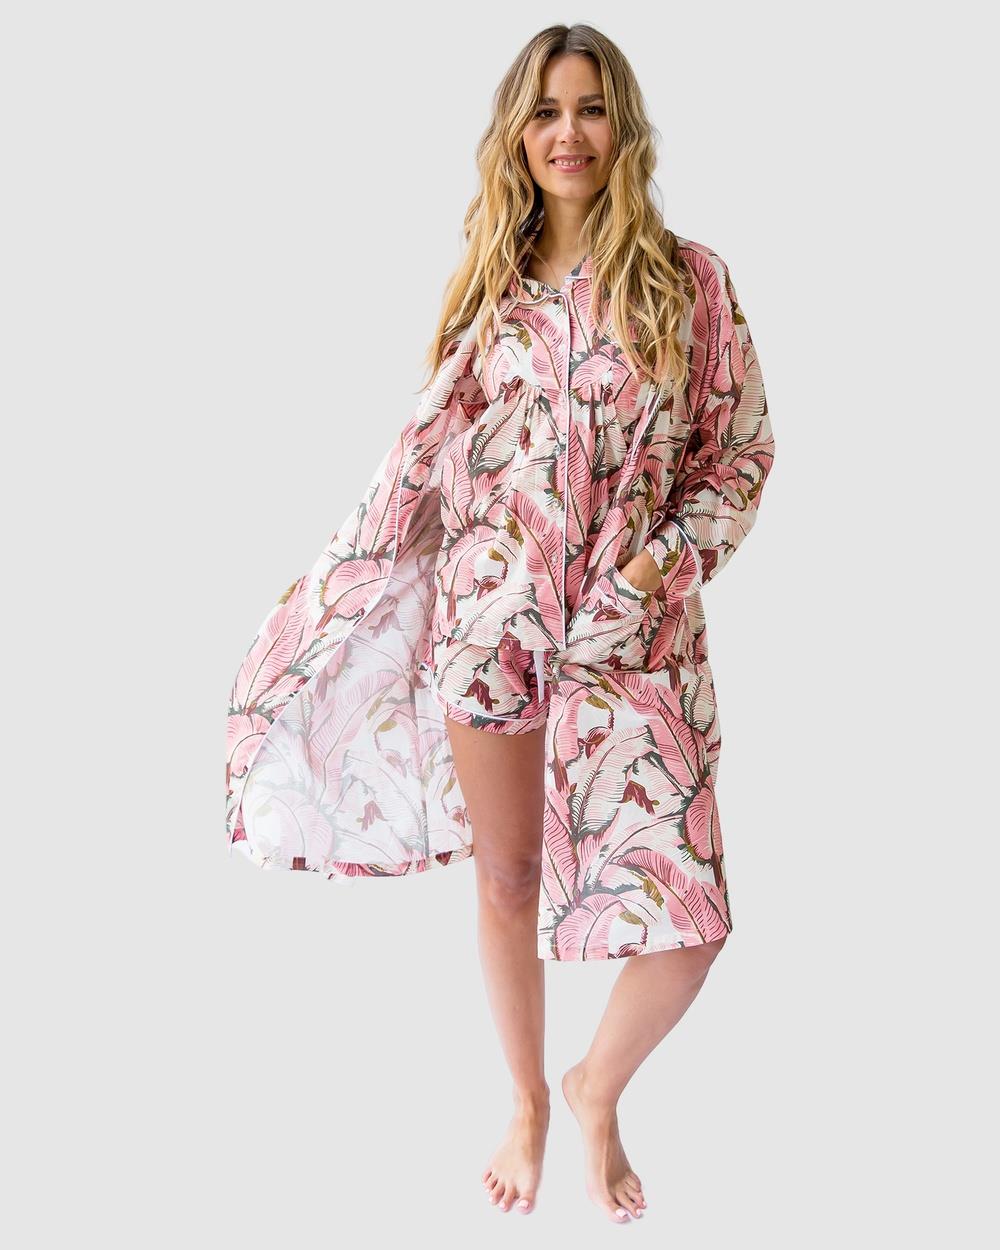 Sant And Abel - Martinique® Pink Banana Leaf Robe - Sleepwear (Pink) Martinique® Pink Banana Leaf Robe